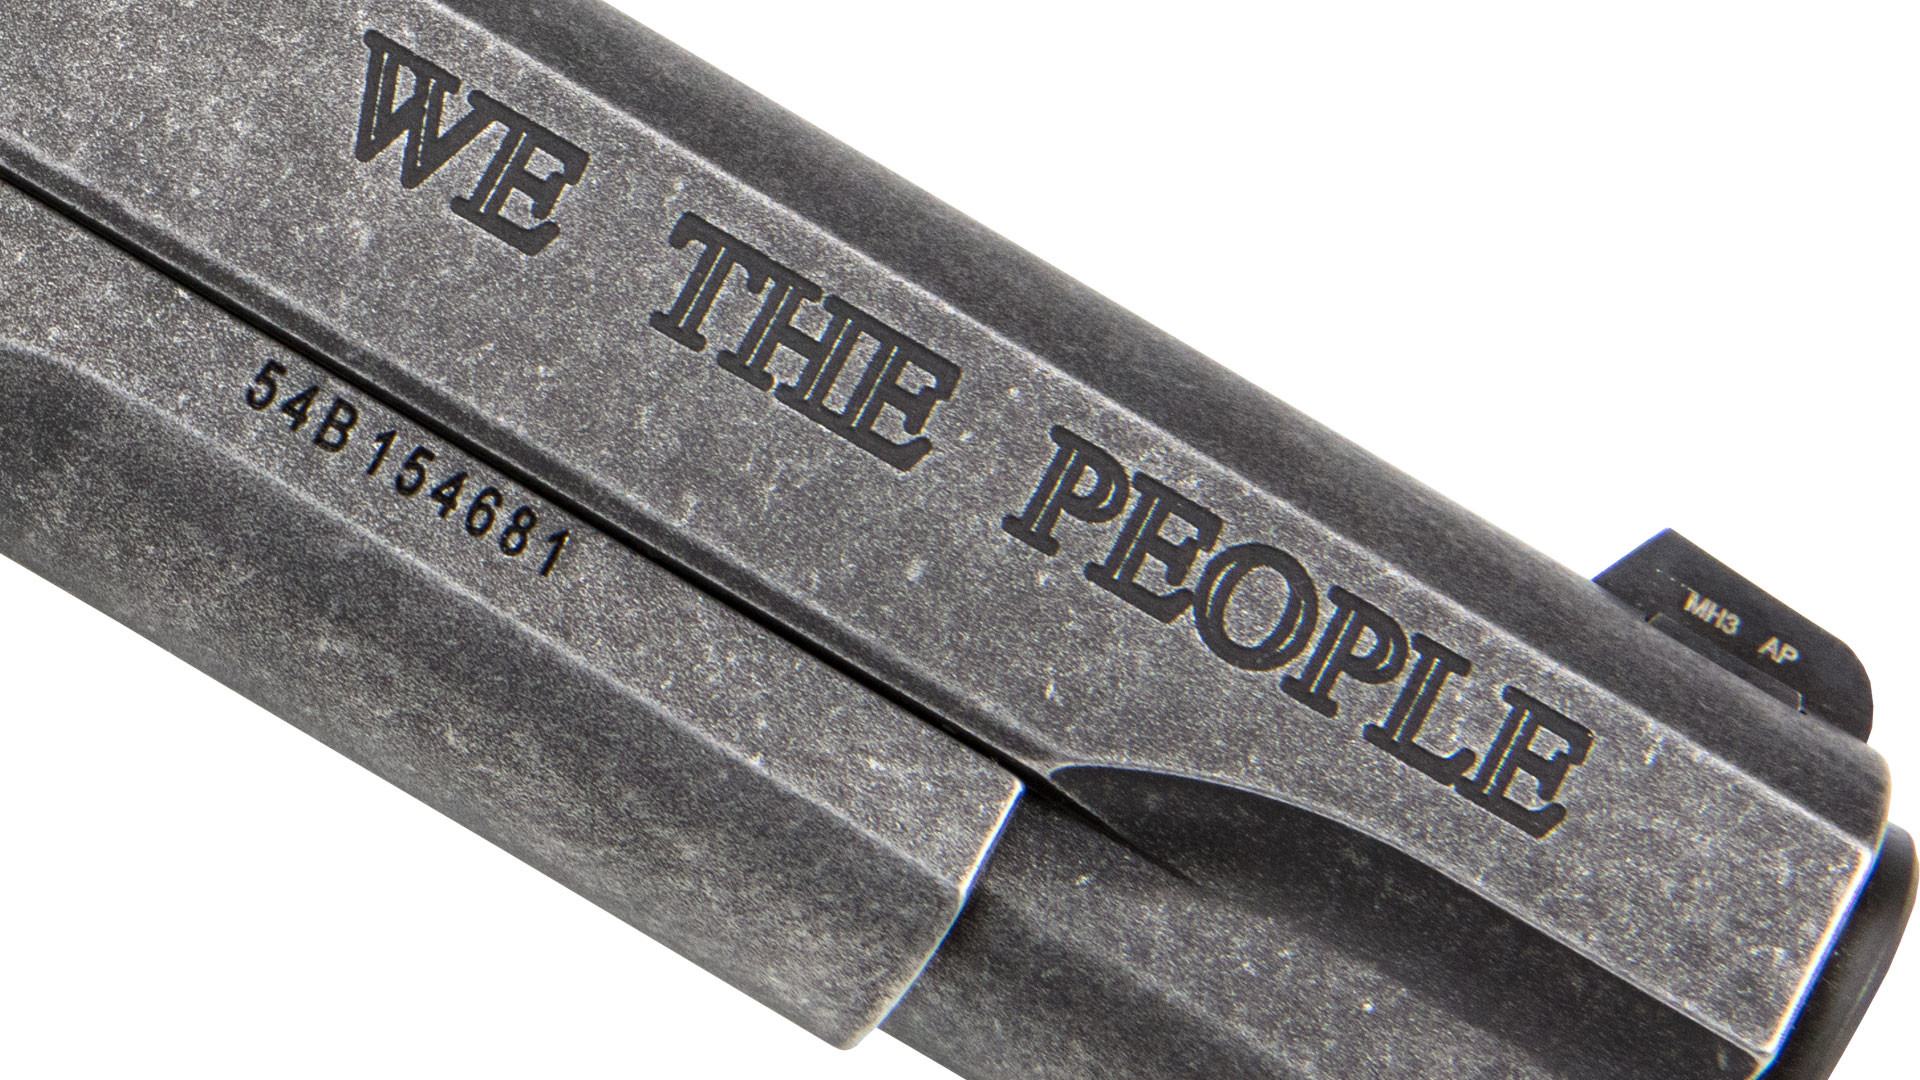 1920x1080 We The People Engraving